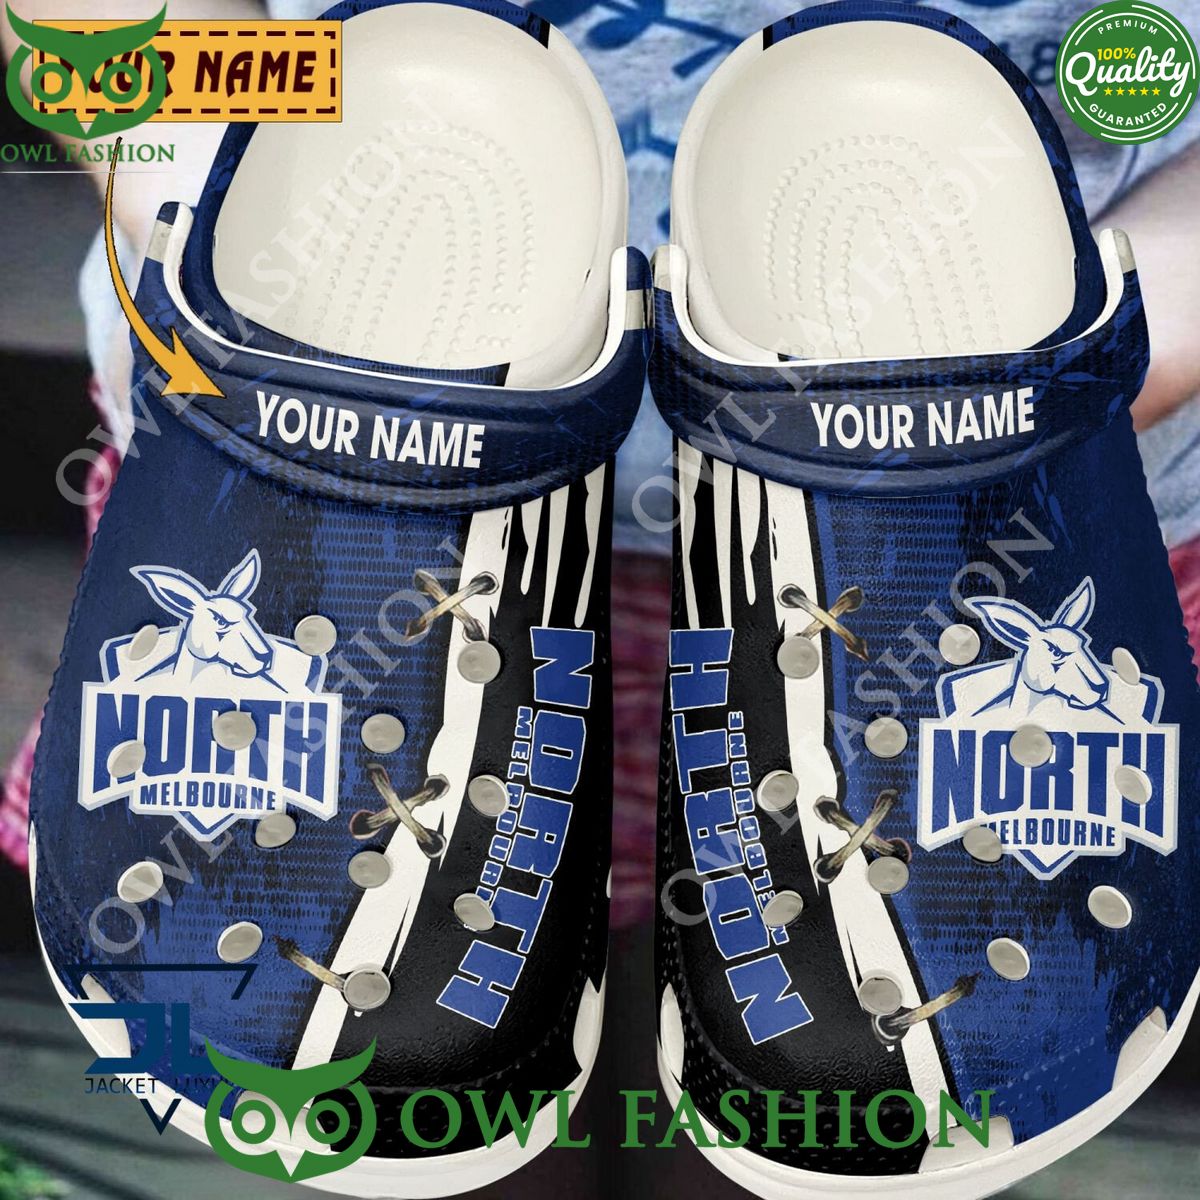 North Melbourne Football Club New Personalized Crocs You look handsome bro